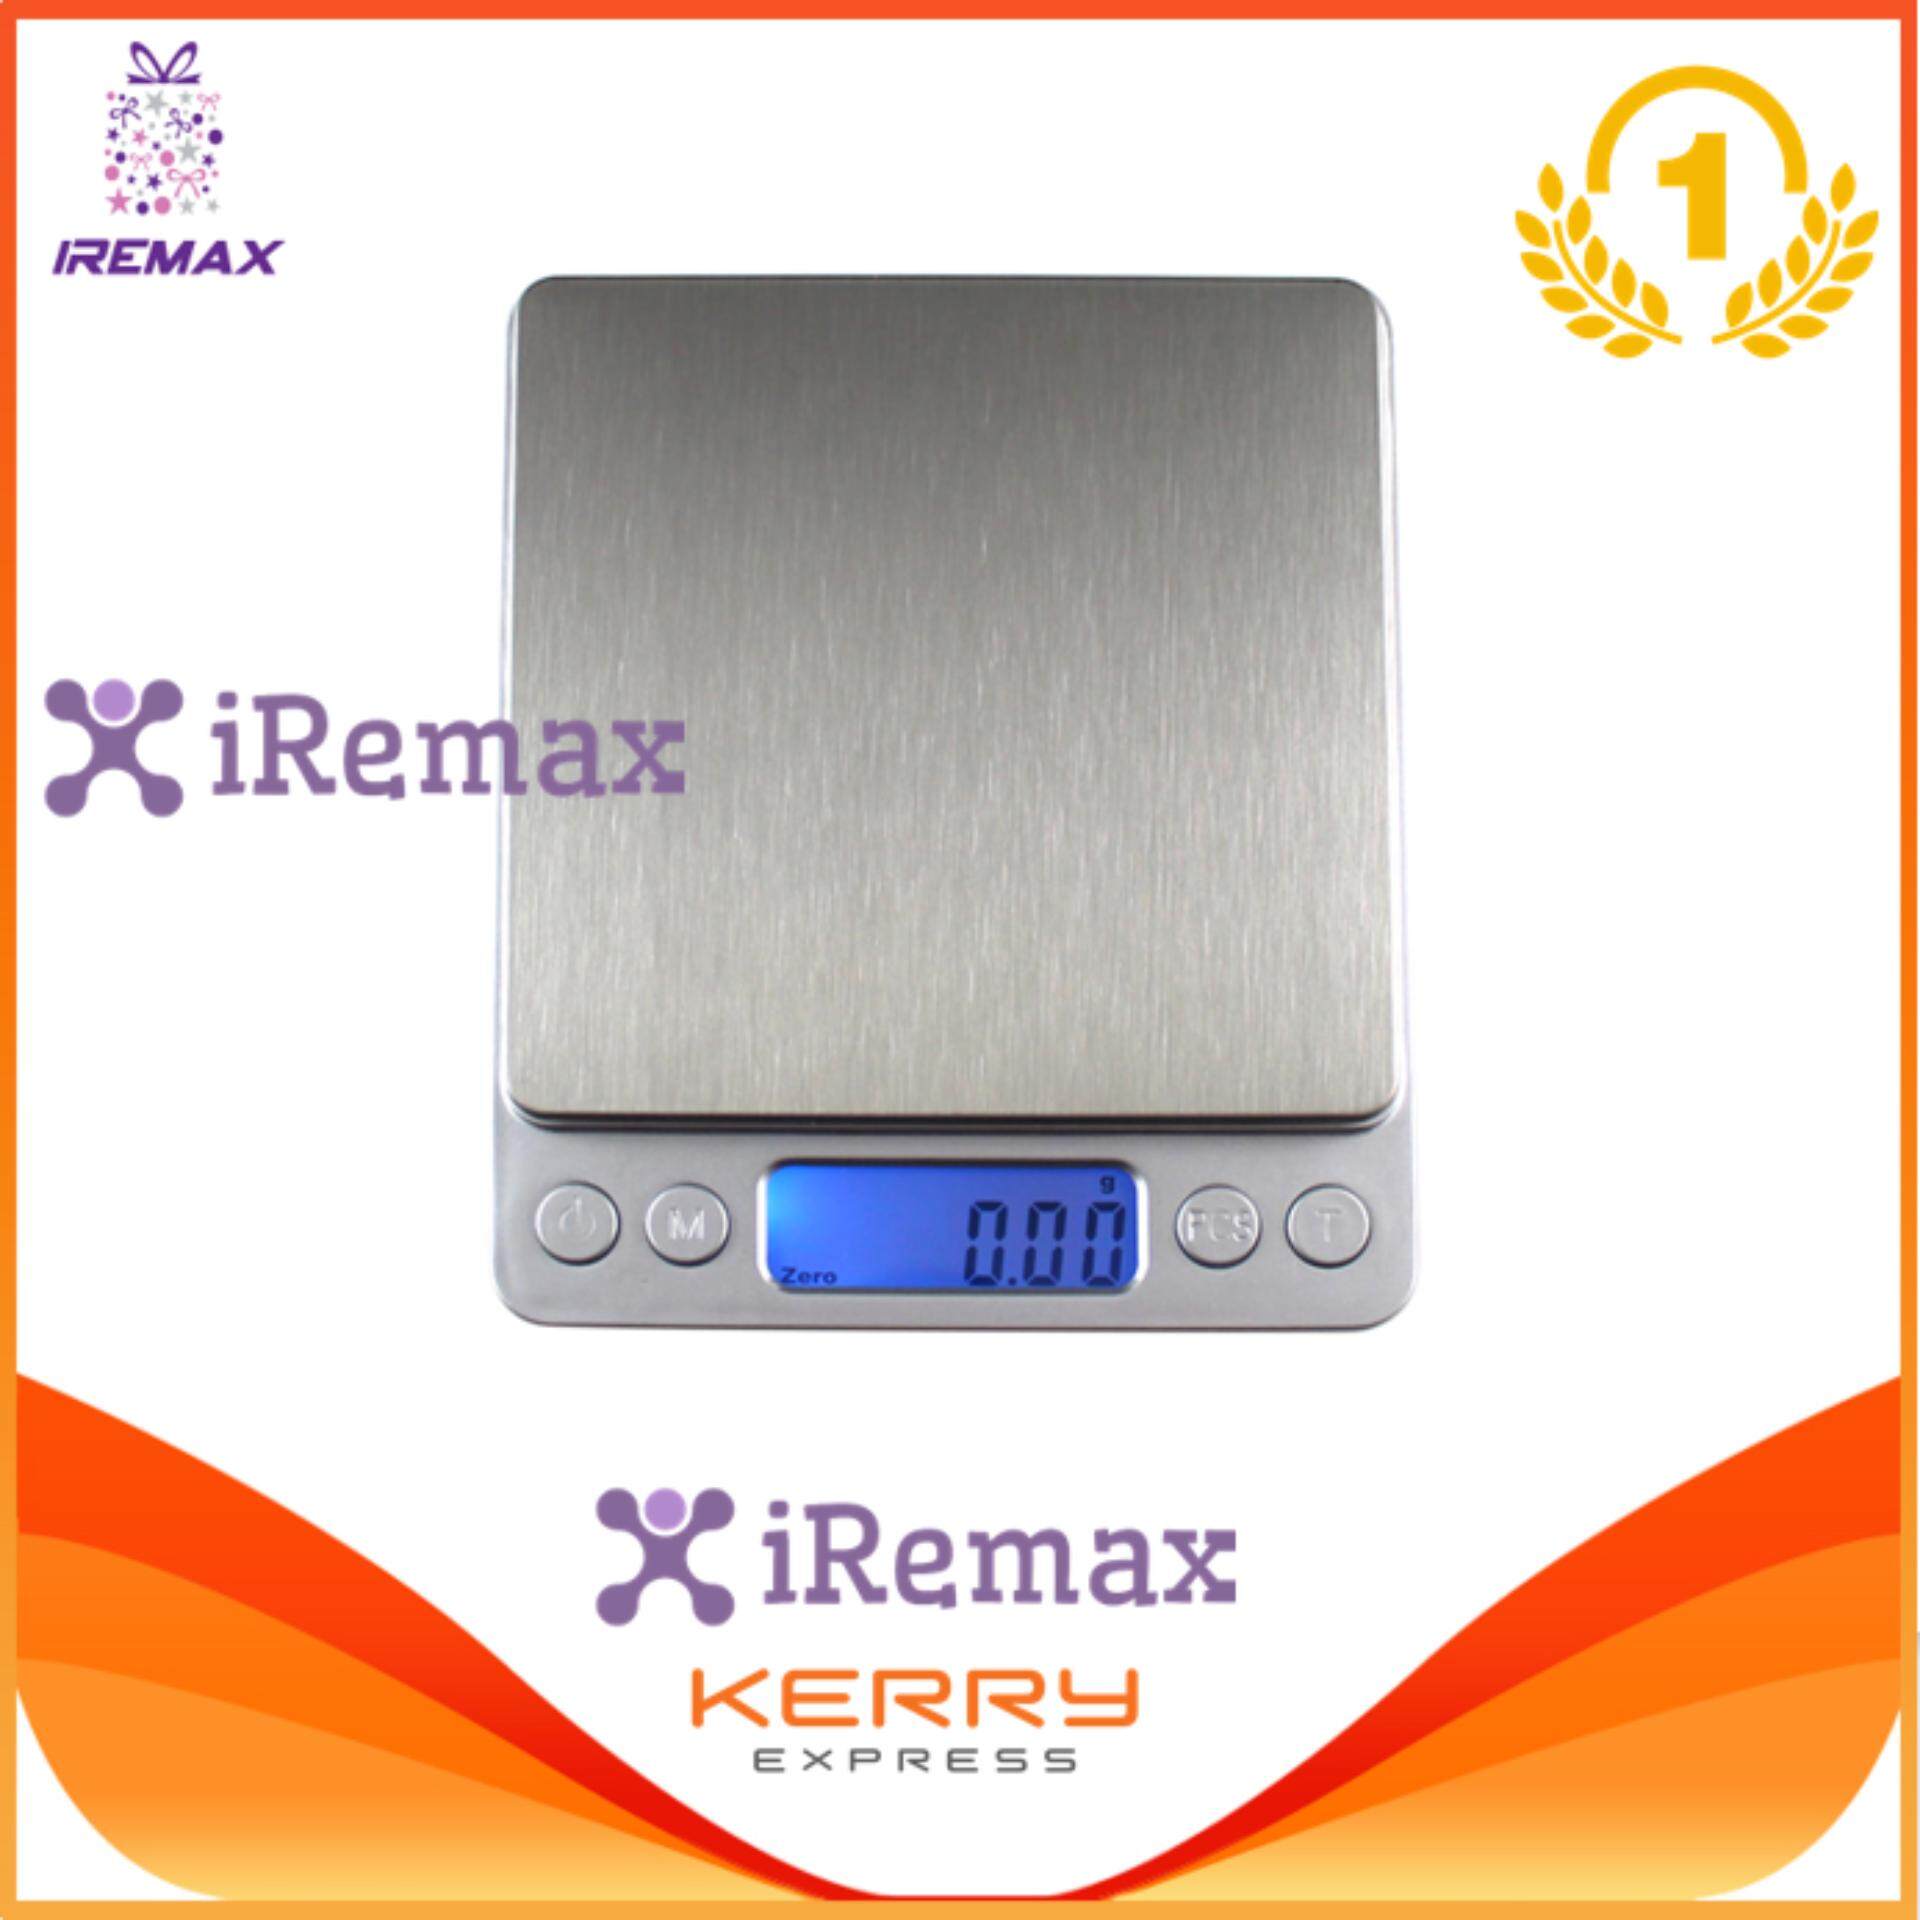 iremax 0.001oz/0.01g 500g Digital Pocket Scale With Back-Lit LCD Display Silver